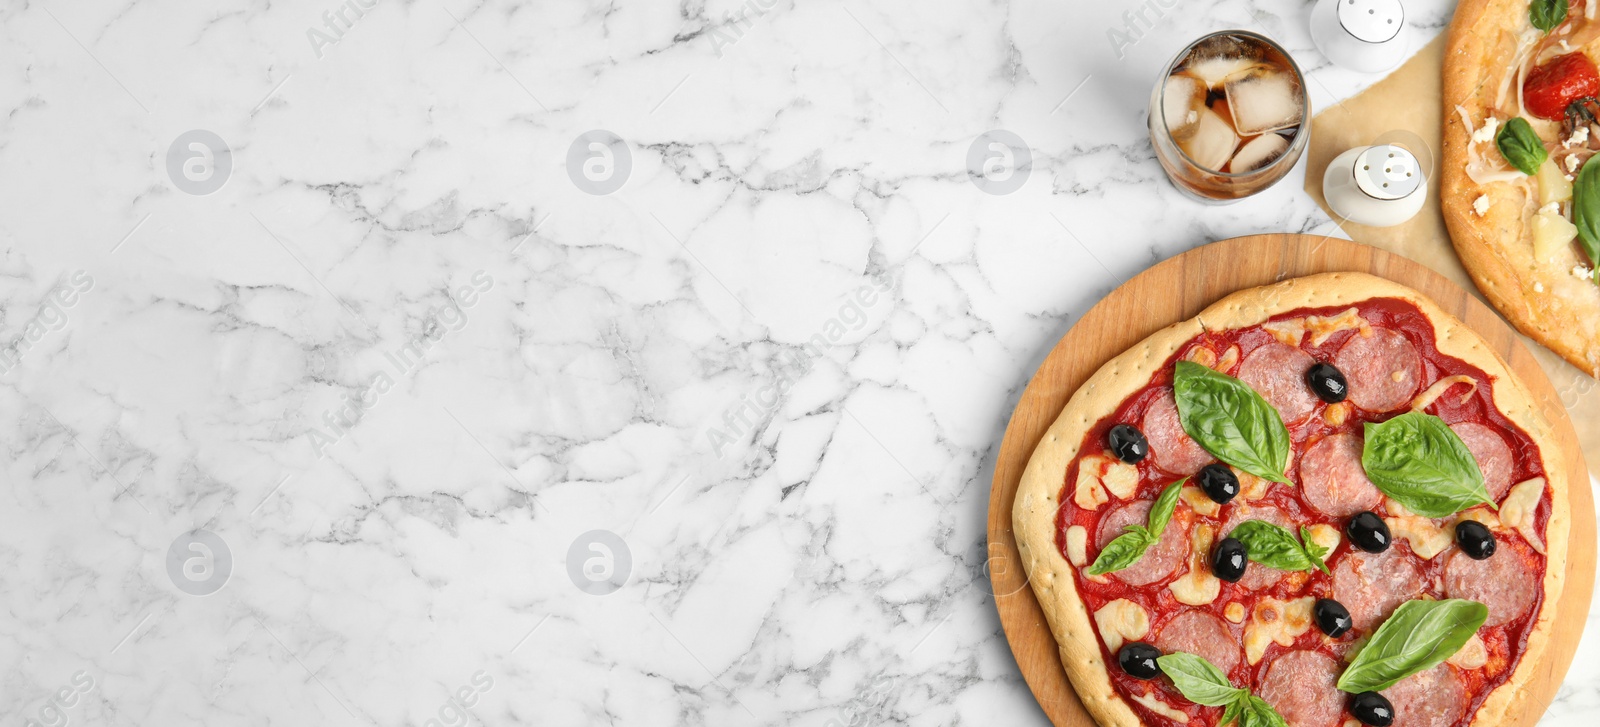 Image of Delicious homemade pita pizza and cold drink on white marble table, flat lay with space for text. Banner design